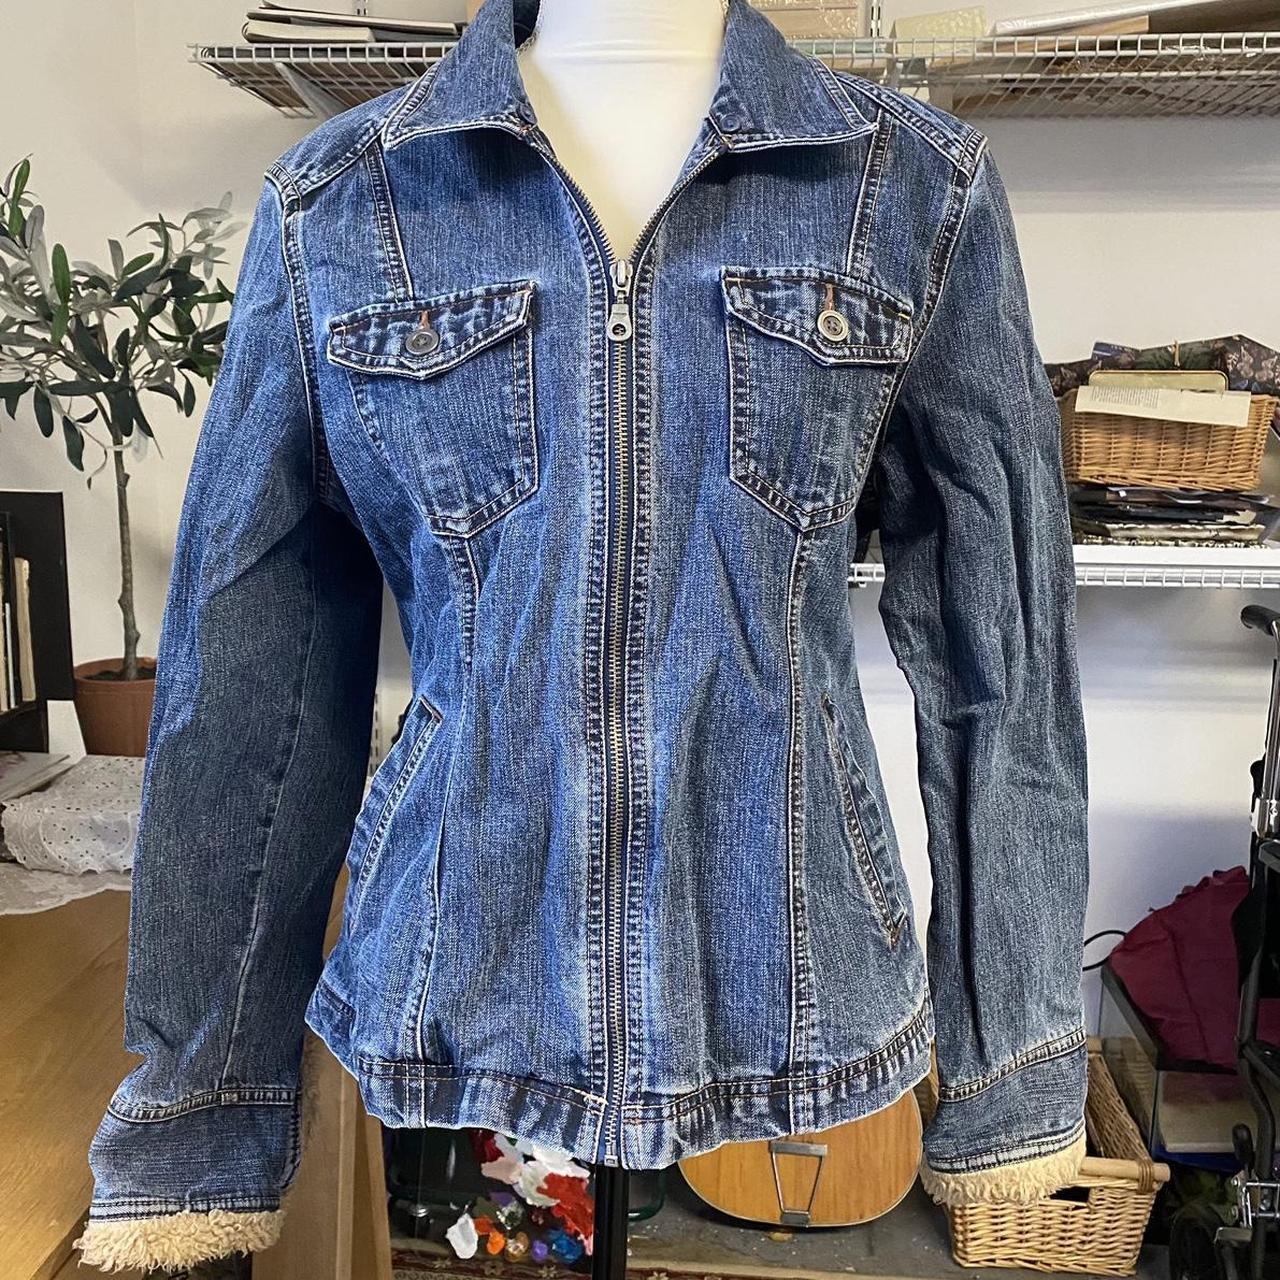 Brand French Cuff - Jean jacket 💗 Super adorable... - Depop